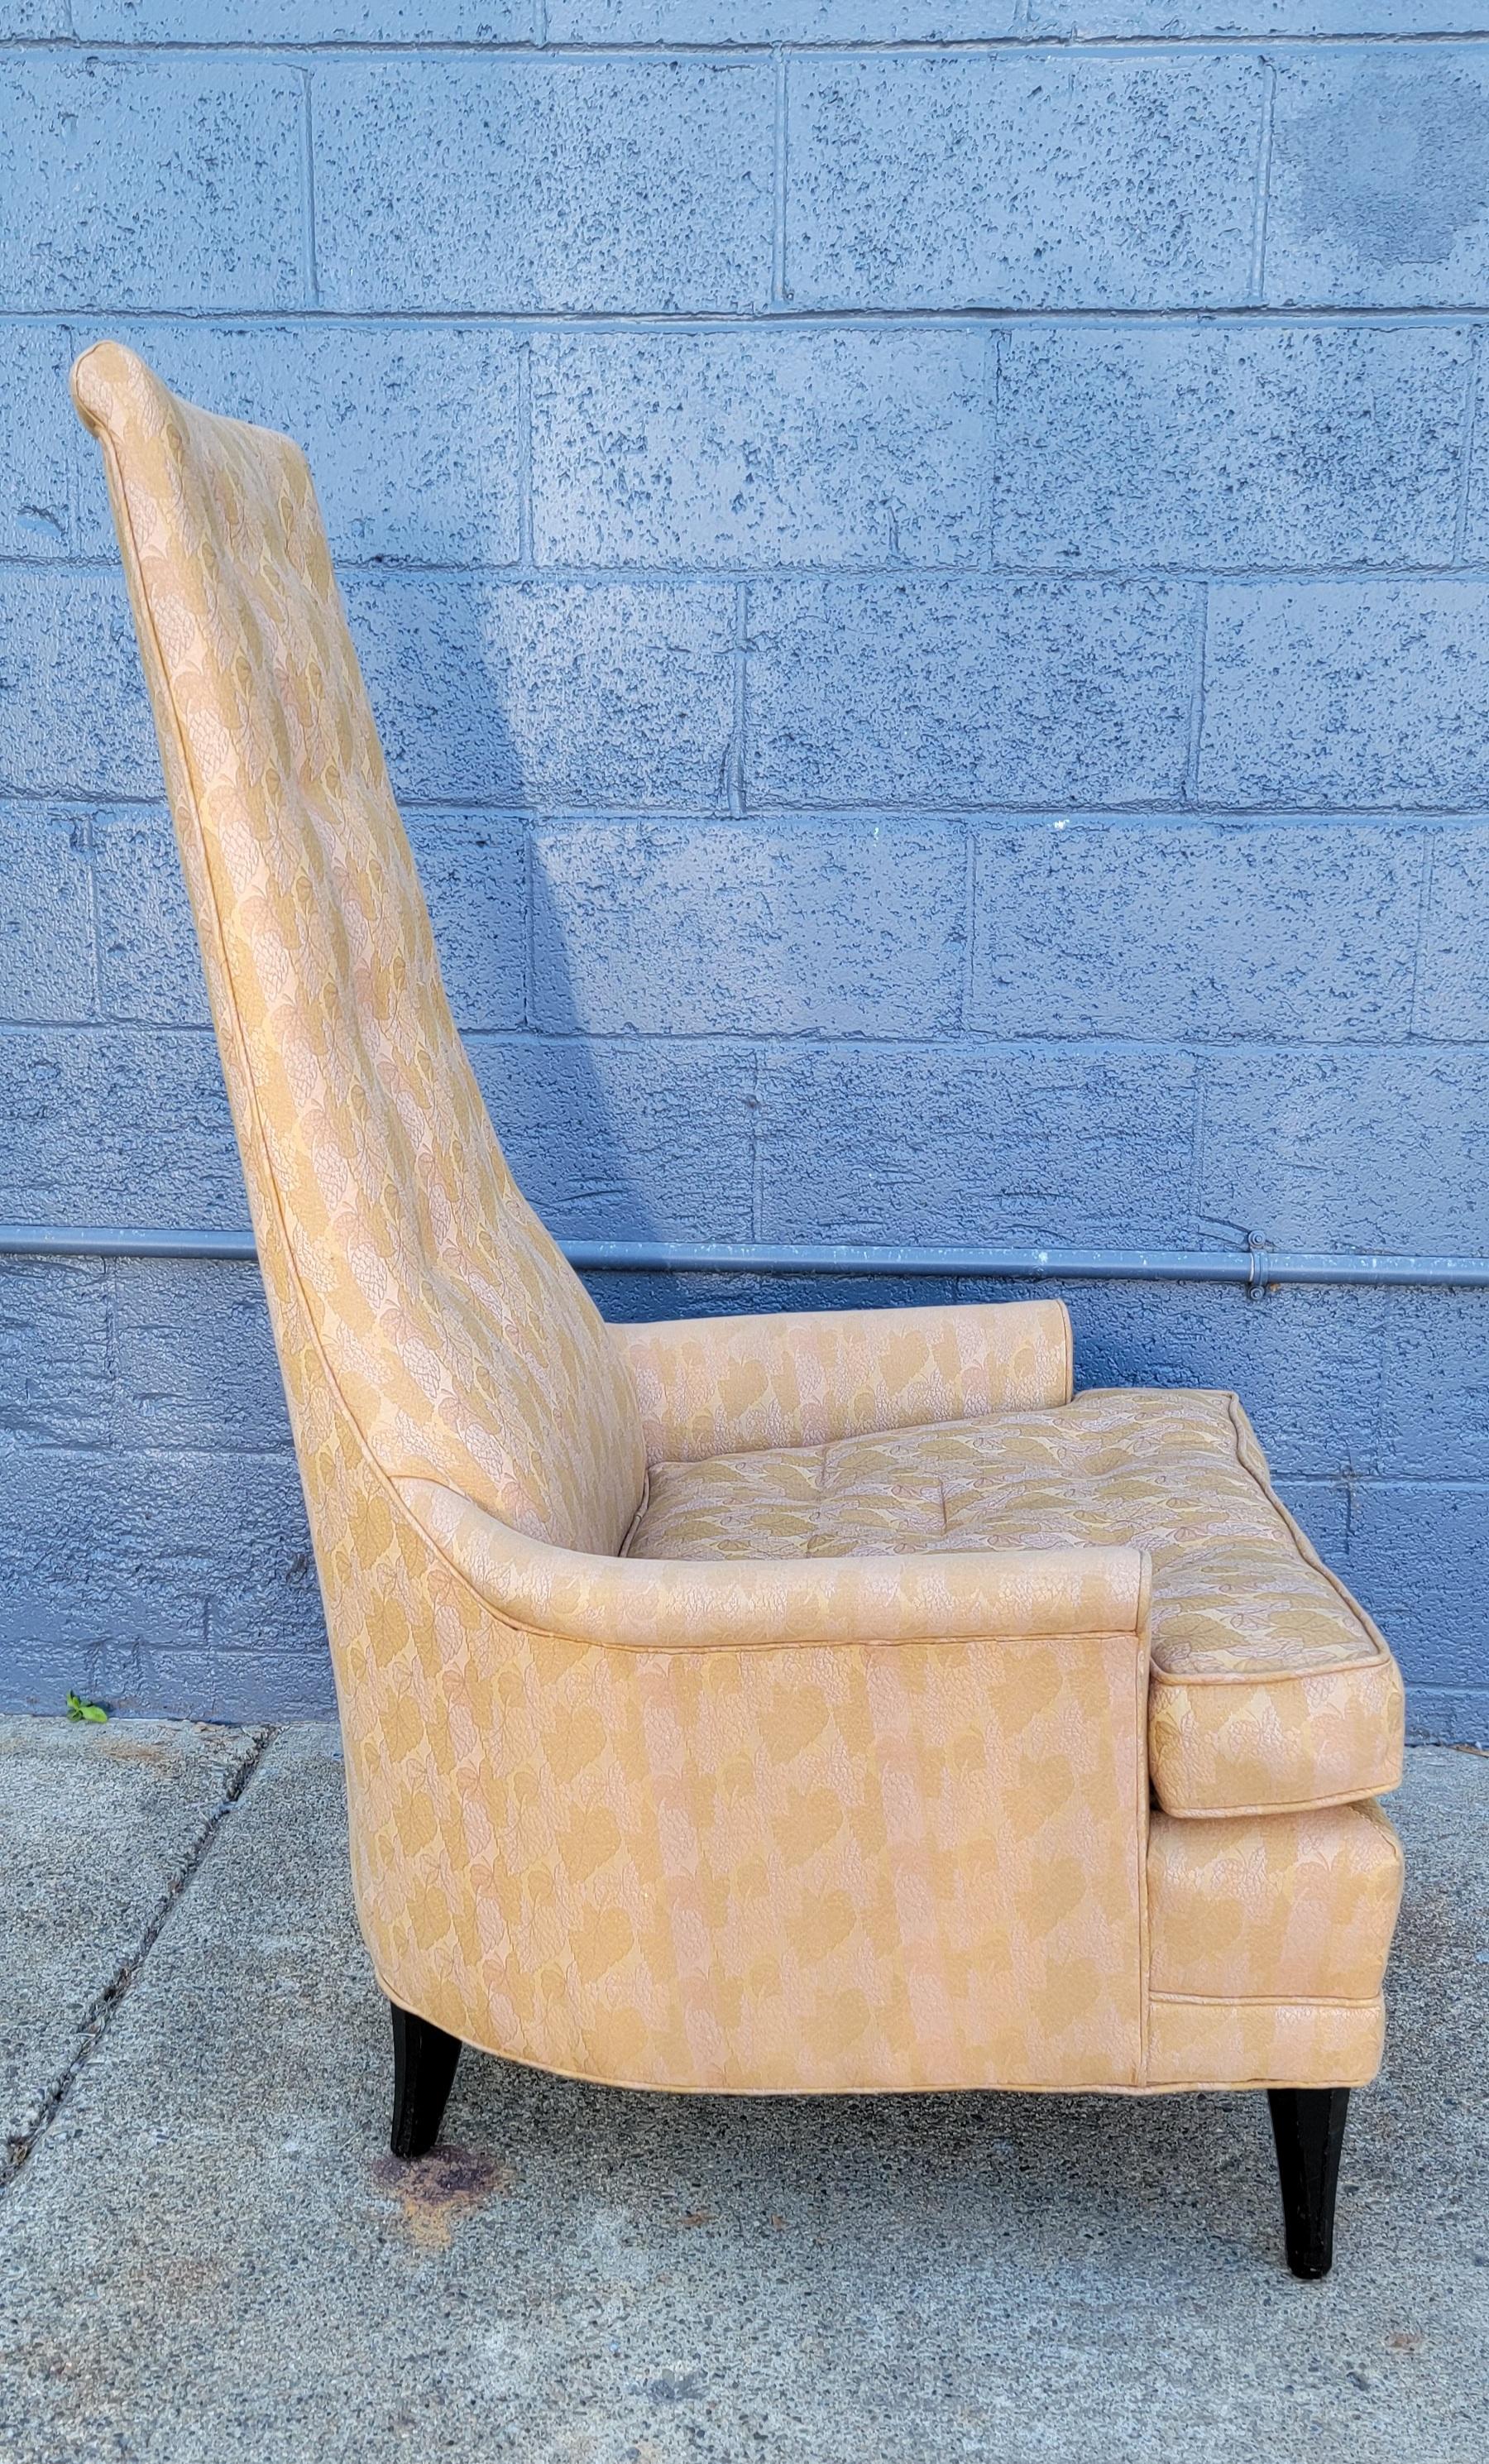 Hollywood Regency High-Back Lounge Chair In Good Condition For Sale In Fulton, CA